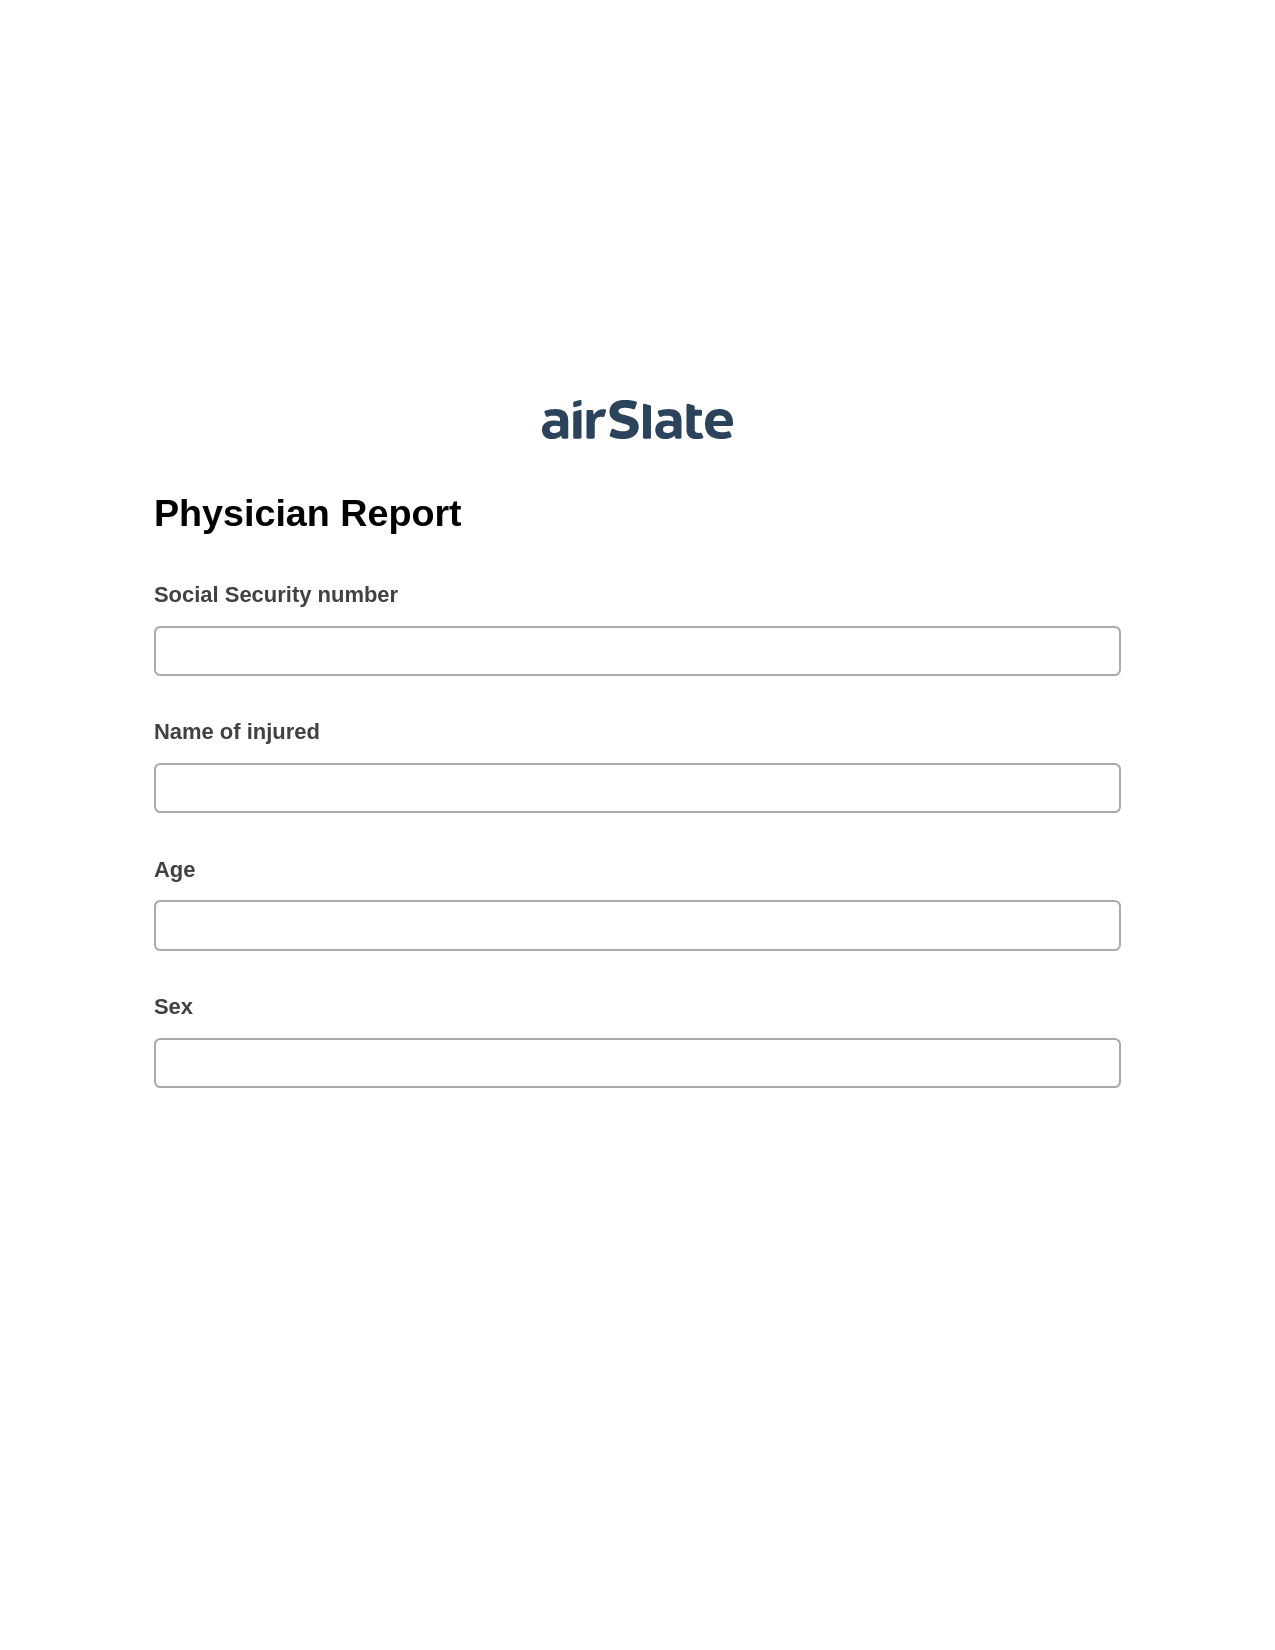 Multirole Physician Report Pre-fill from MS Dynamics 365 Records, Create slate addon, Export to Smartsheet